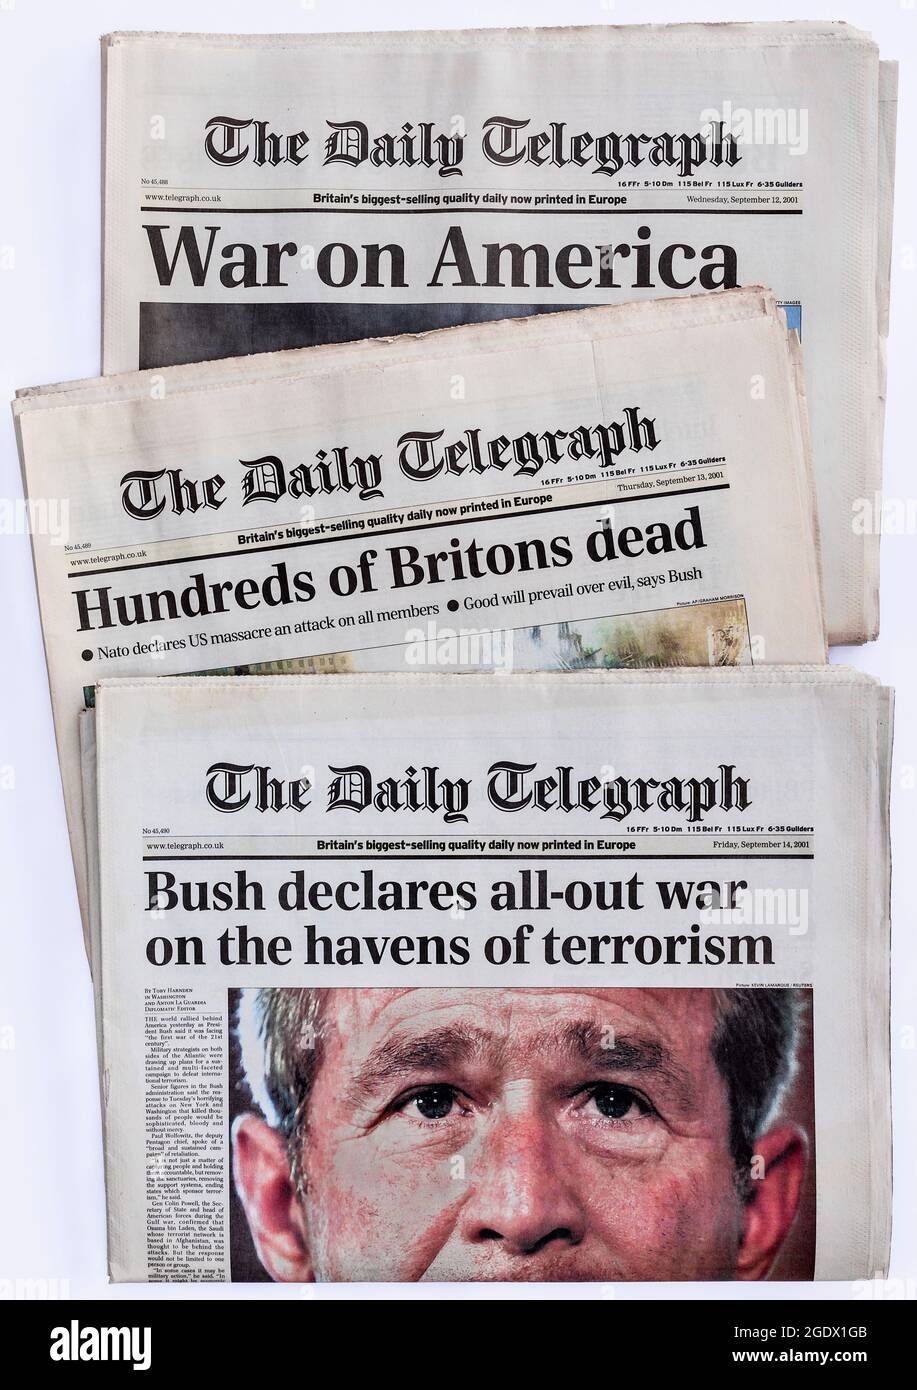 English 'Daily Telegraph' front page headlines on 12/13/14 Sept - 9/11 terror attack on the World Trade Center, New York, USA, September 11, 2001. Stock Photo